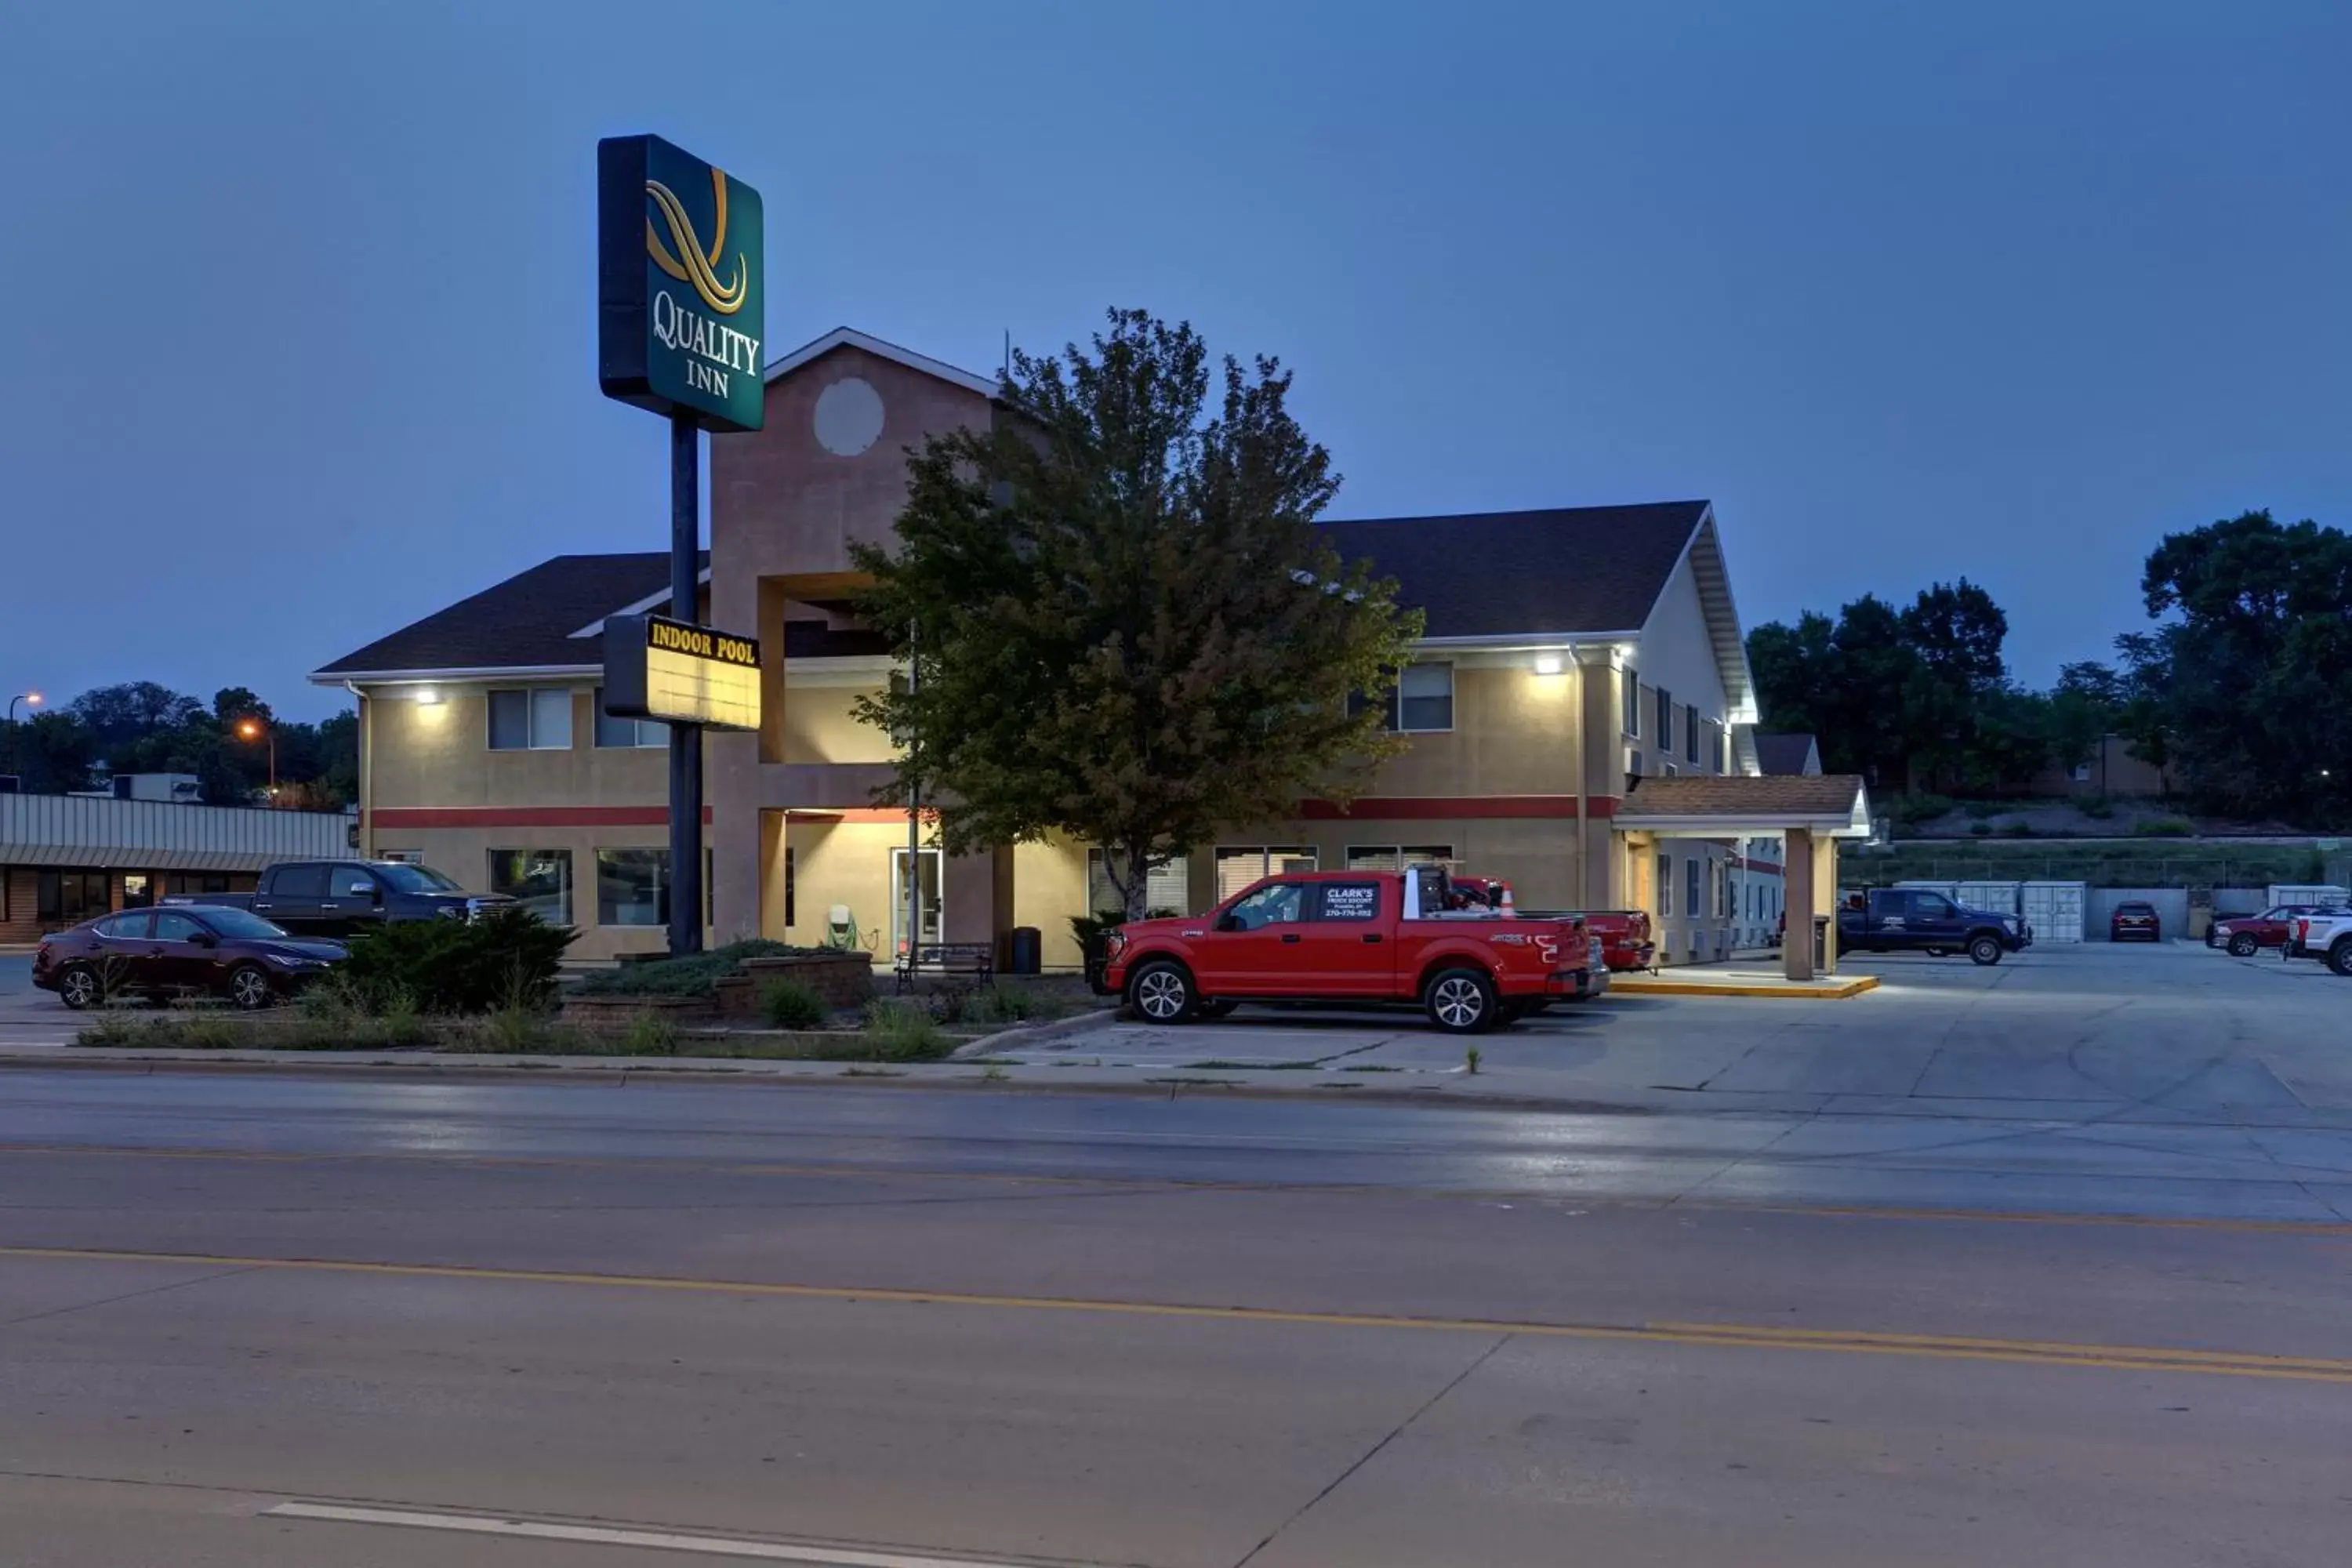 Property Building in Quality Inn Pierre-Fort Pierre